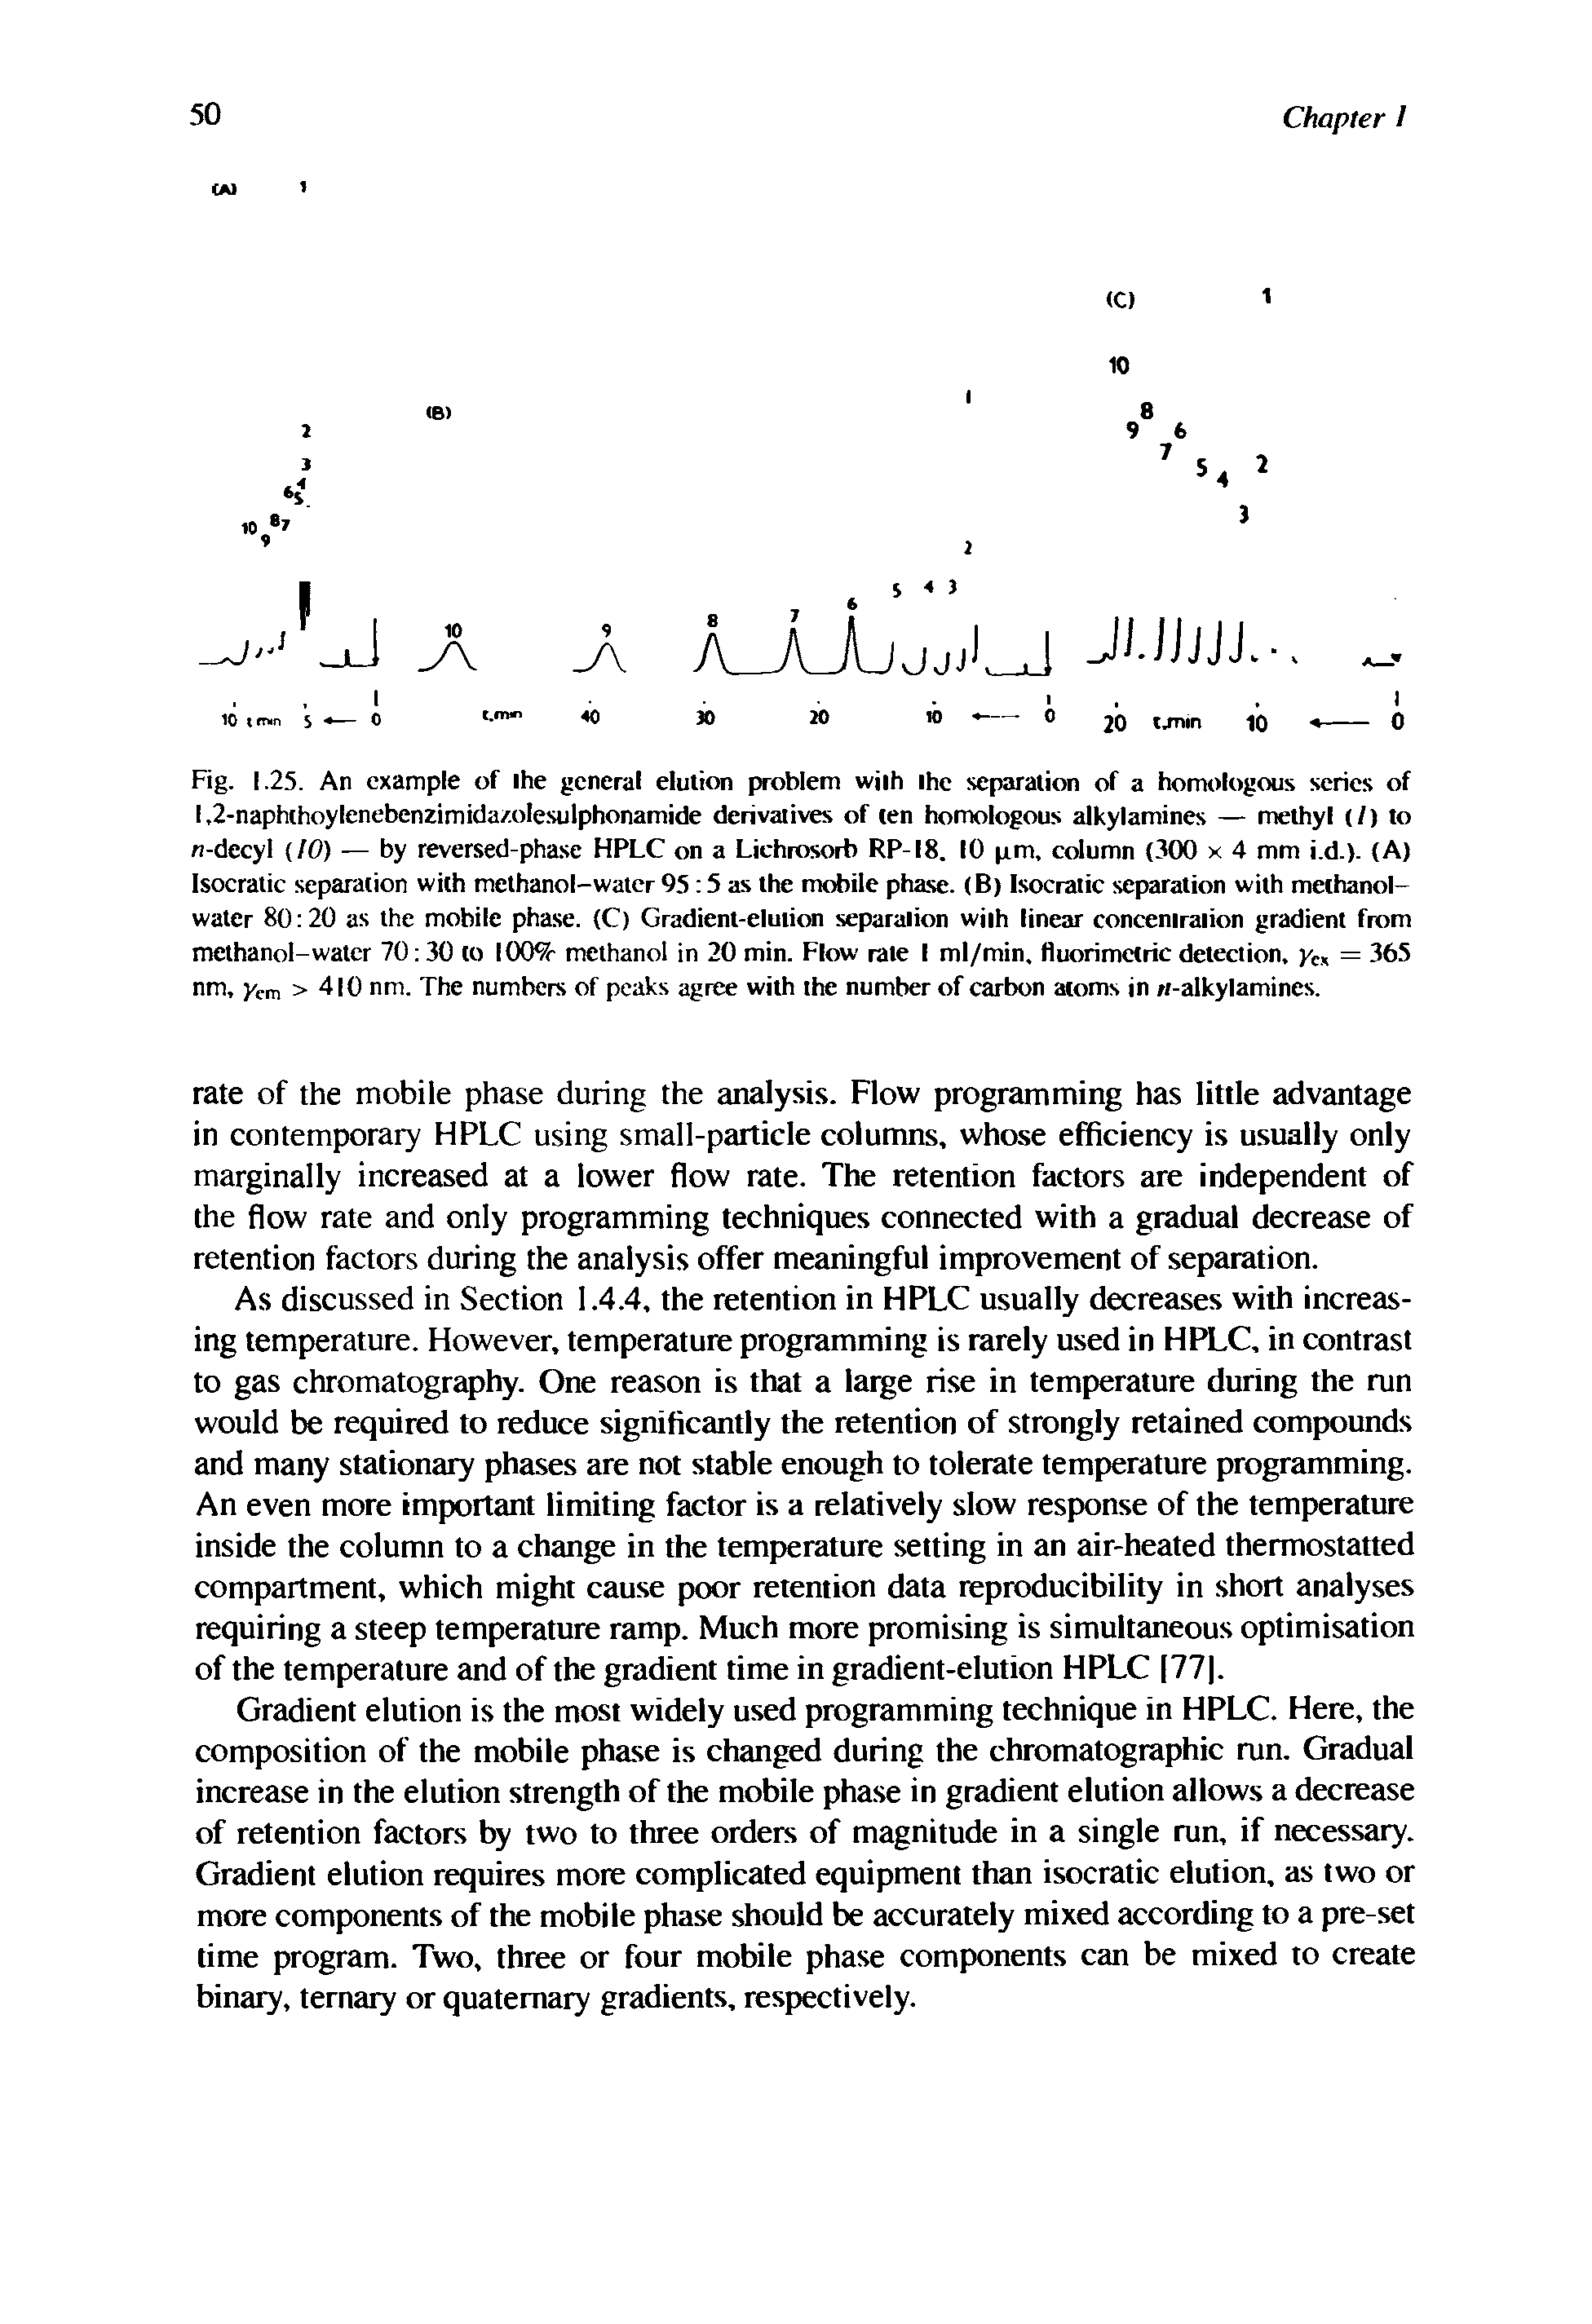 Fig. 1.25. An example of ihe general elution problem with ihc separation of a homologous series of l,2-naph(hoylenebenzimida/,olesulphonamide derivatives of ten homologous alkylamines — methyl (/) to n-decyl (/O) — by reversed-phase HPLC on a Liehrosorb RP-18. 10 pm, column (300 x 4 mm i.d.). (A) Isocratic separation with methanol-water 95 5 as the mobile phase. (B) Isocraiic separation with methanol-water 80 20 as the mobile phase. (C) Gradient-elution separation with linear concentration gradient from methanol-water 70 30 to l(X) methanol in 20 min. Flow rale I ml/min. fluorimctric detection, ycx = 365 nm, ytm >410 nm. The numbers of peaks agree with the number of carbon atoms in n-alkylamines.